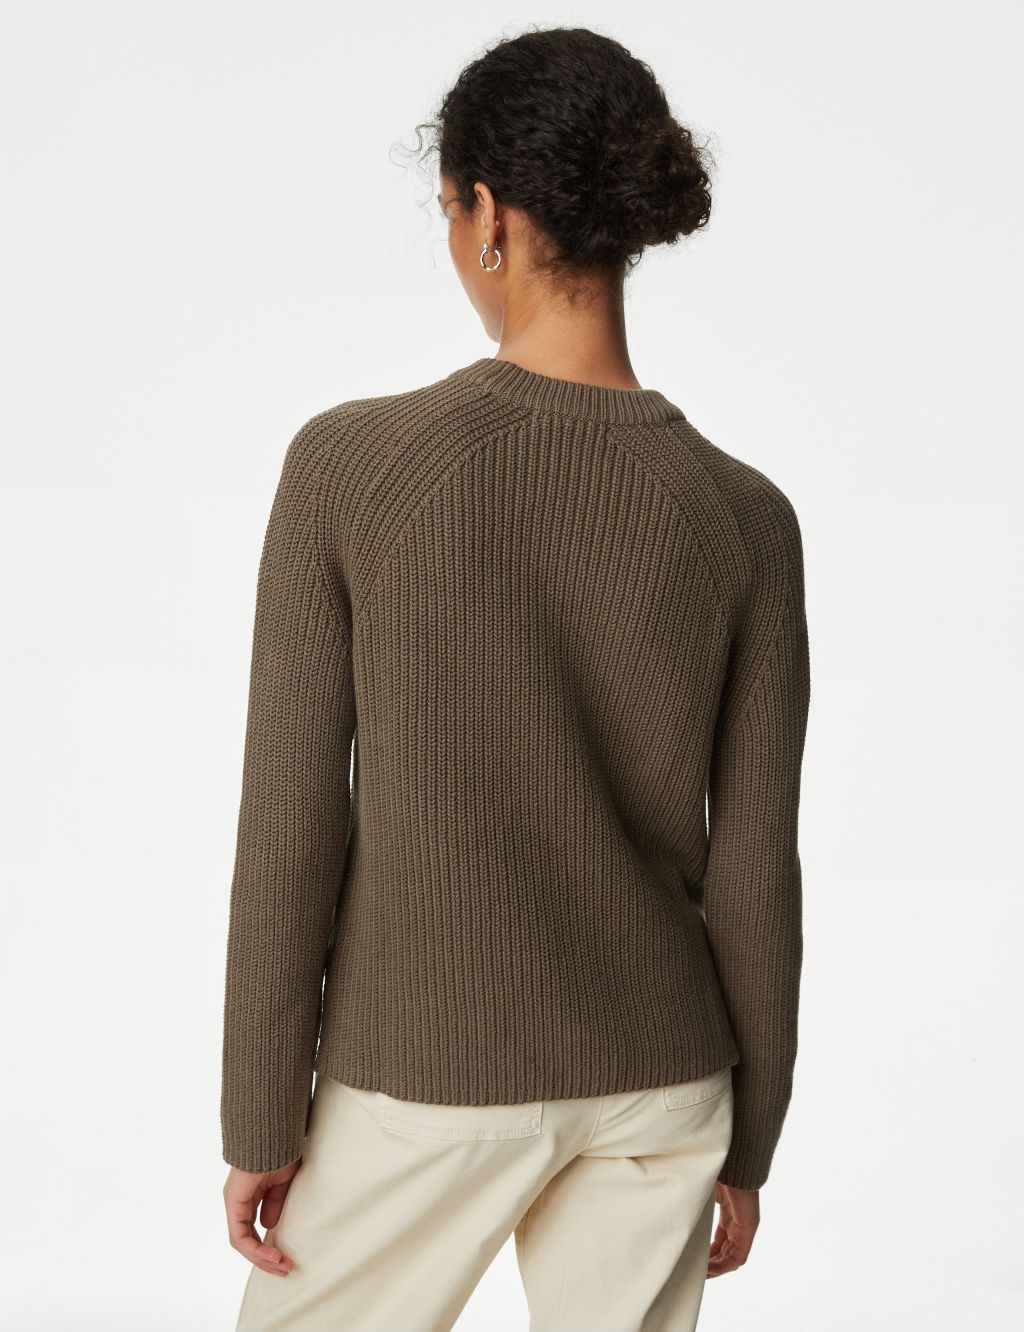 Cotton Rich Ribbed Crew Neck Jumper image 5